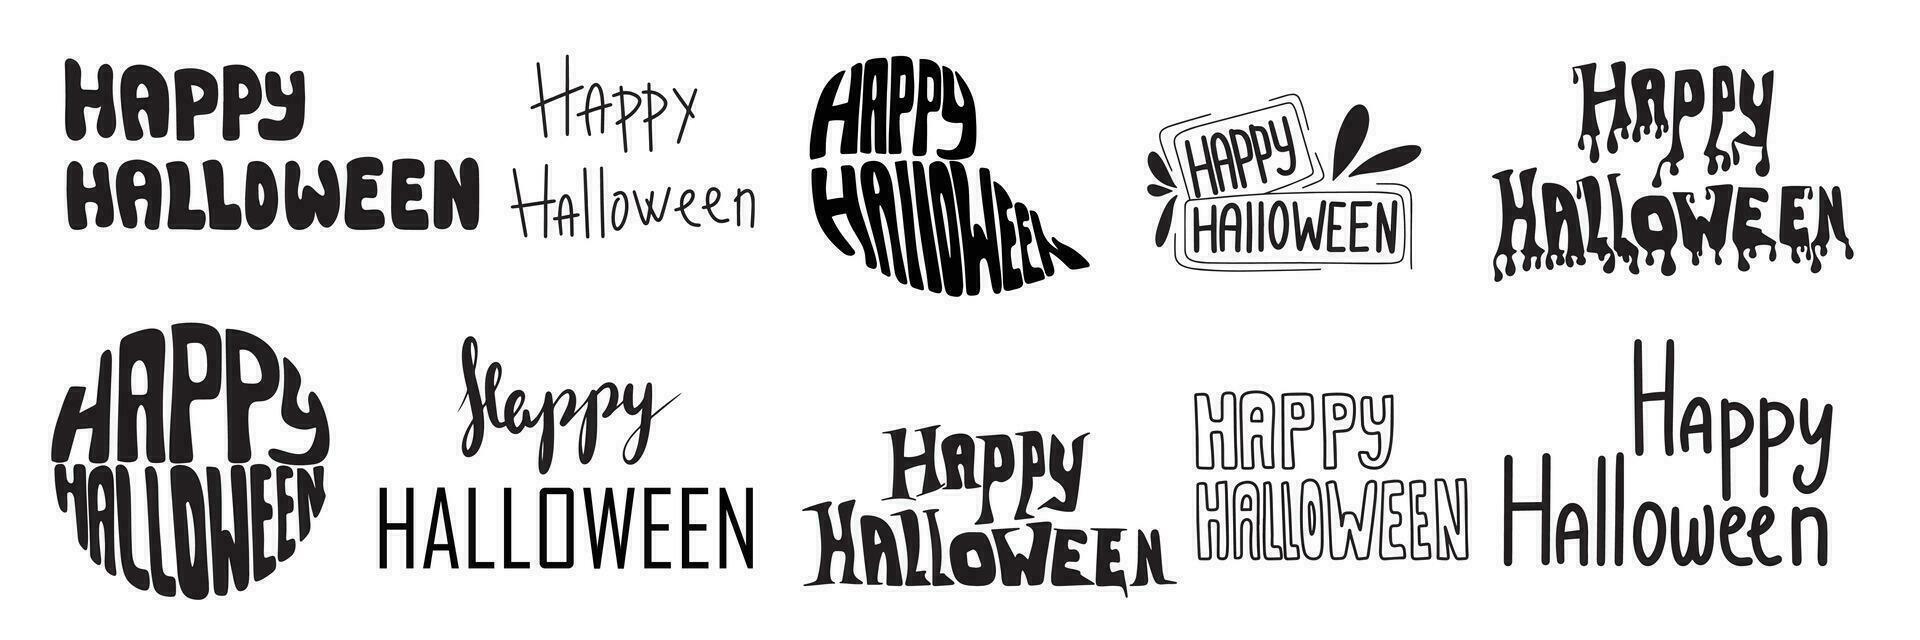 Happy Halloween set text. Hand drawn lettering Happy Halloween collection phrases. Vector illustration in black color.